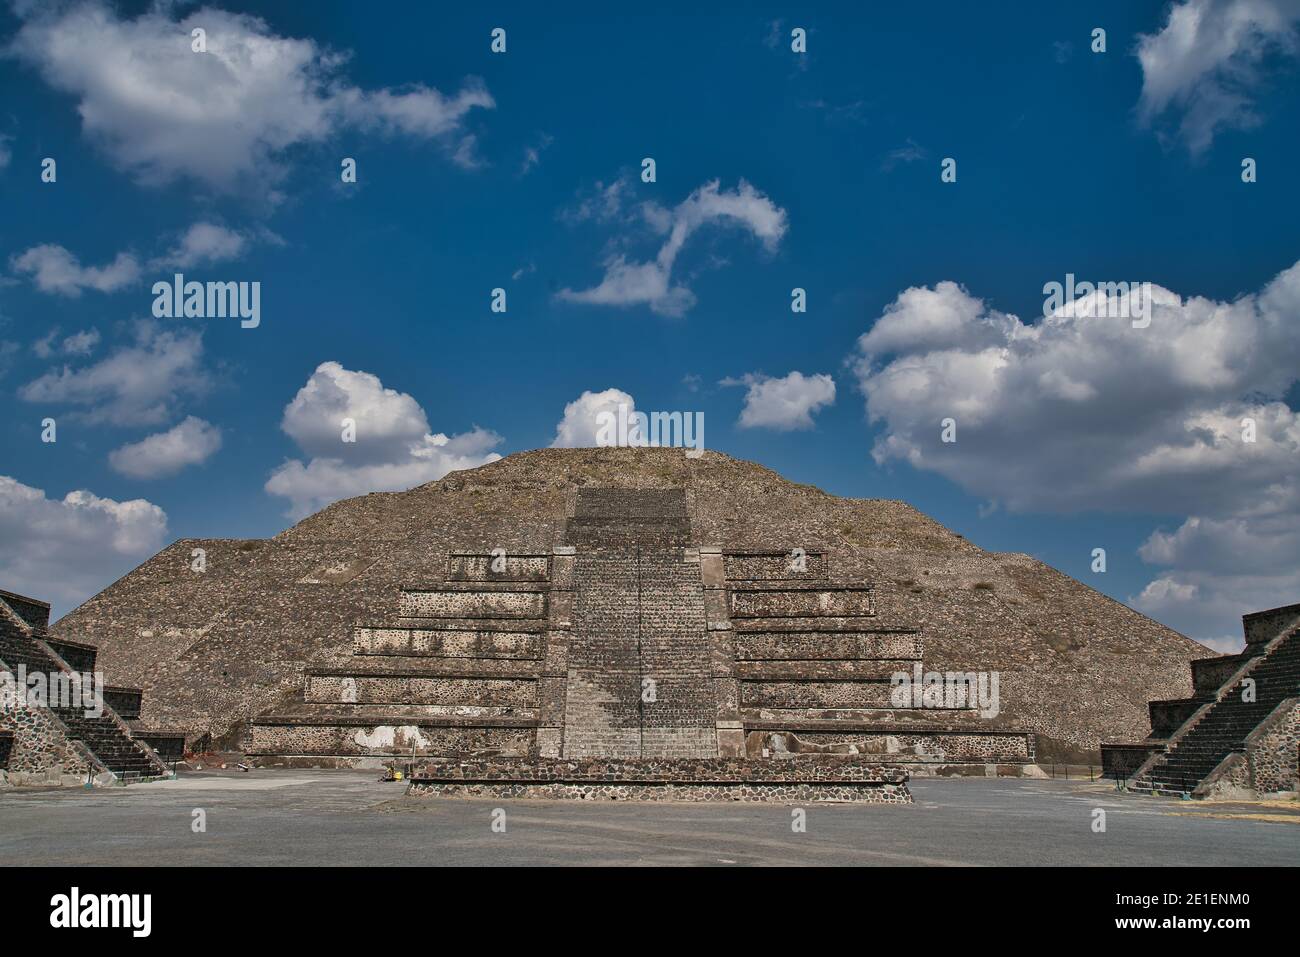 Ancient maya ruin pyramid of the sun in Teotihuacan (Mexico) with almost no people Stock Photo